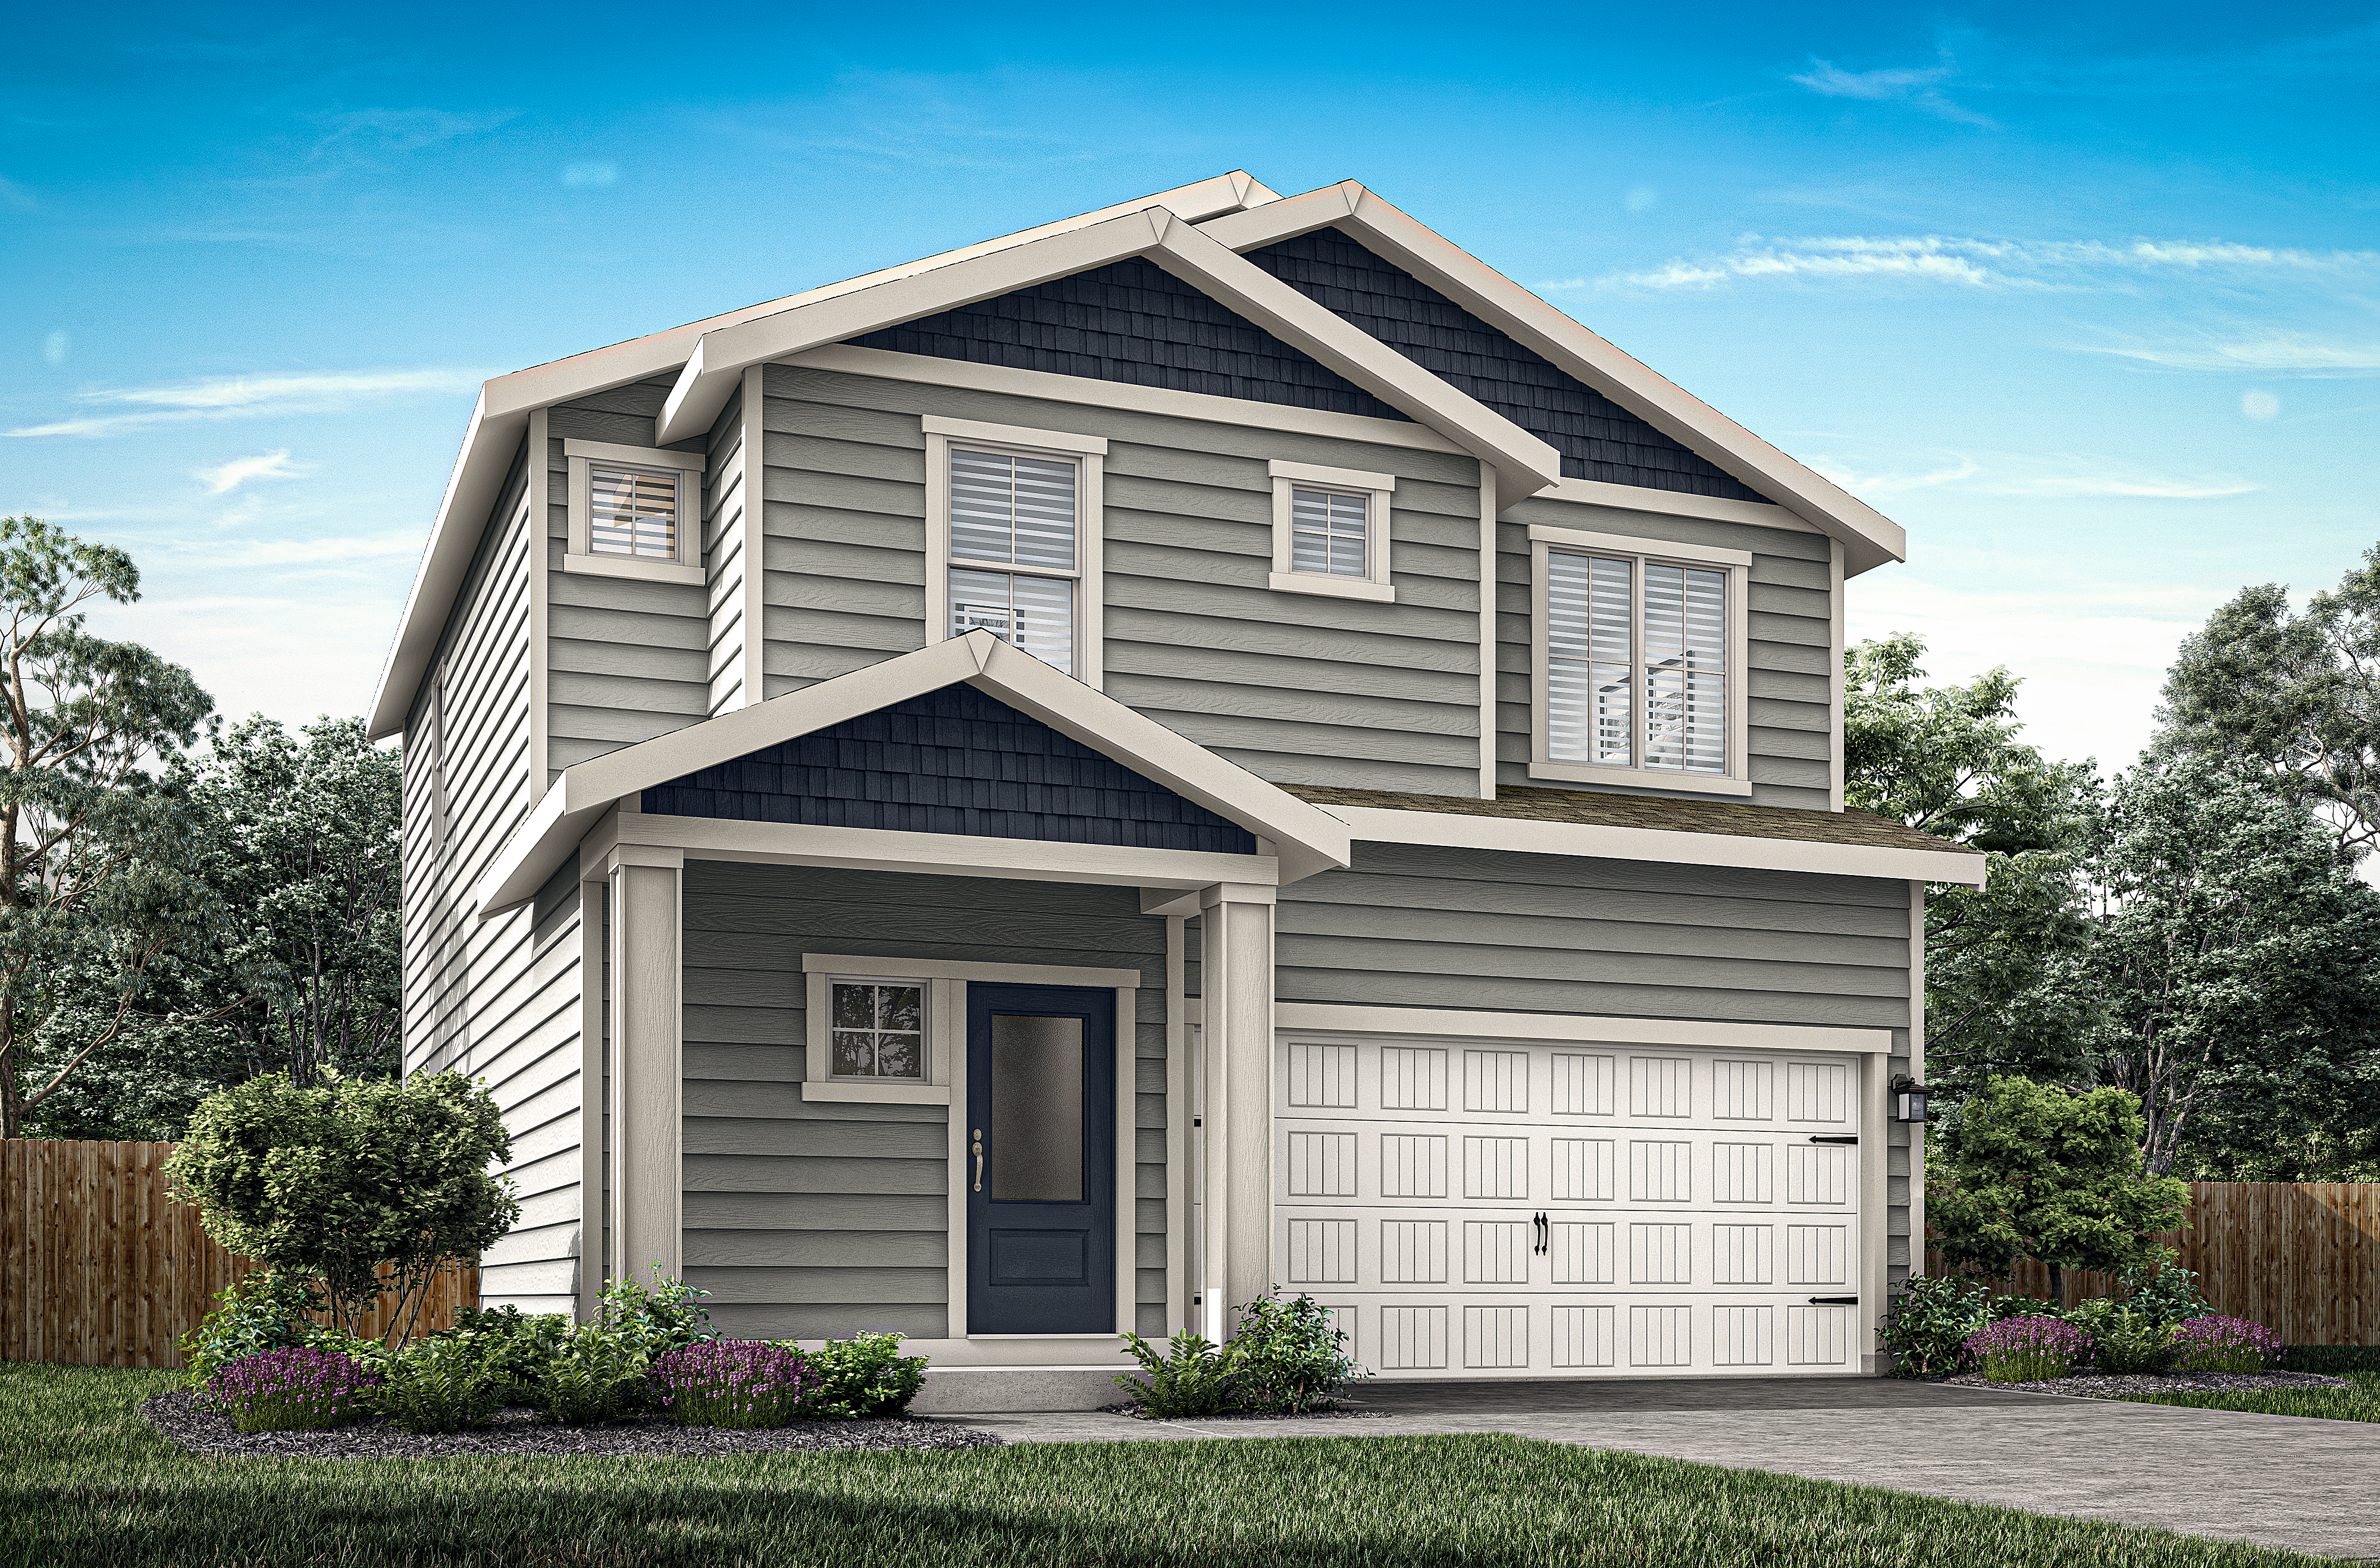 The Cypress Plan by LGI Homes Eagle Landing in Tacoma features three bedrooms, two-and-a-half bathrooms, and a spacious family room.